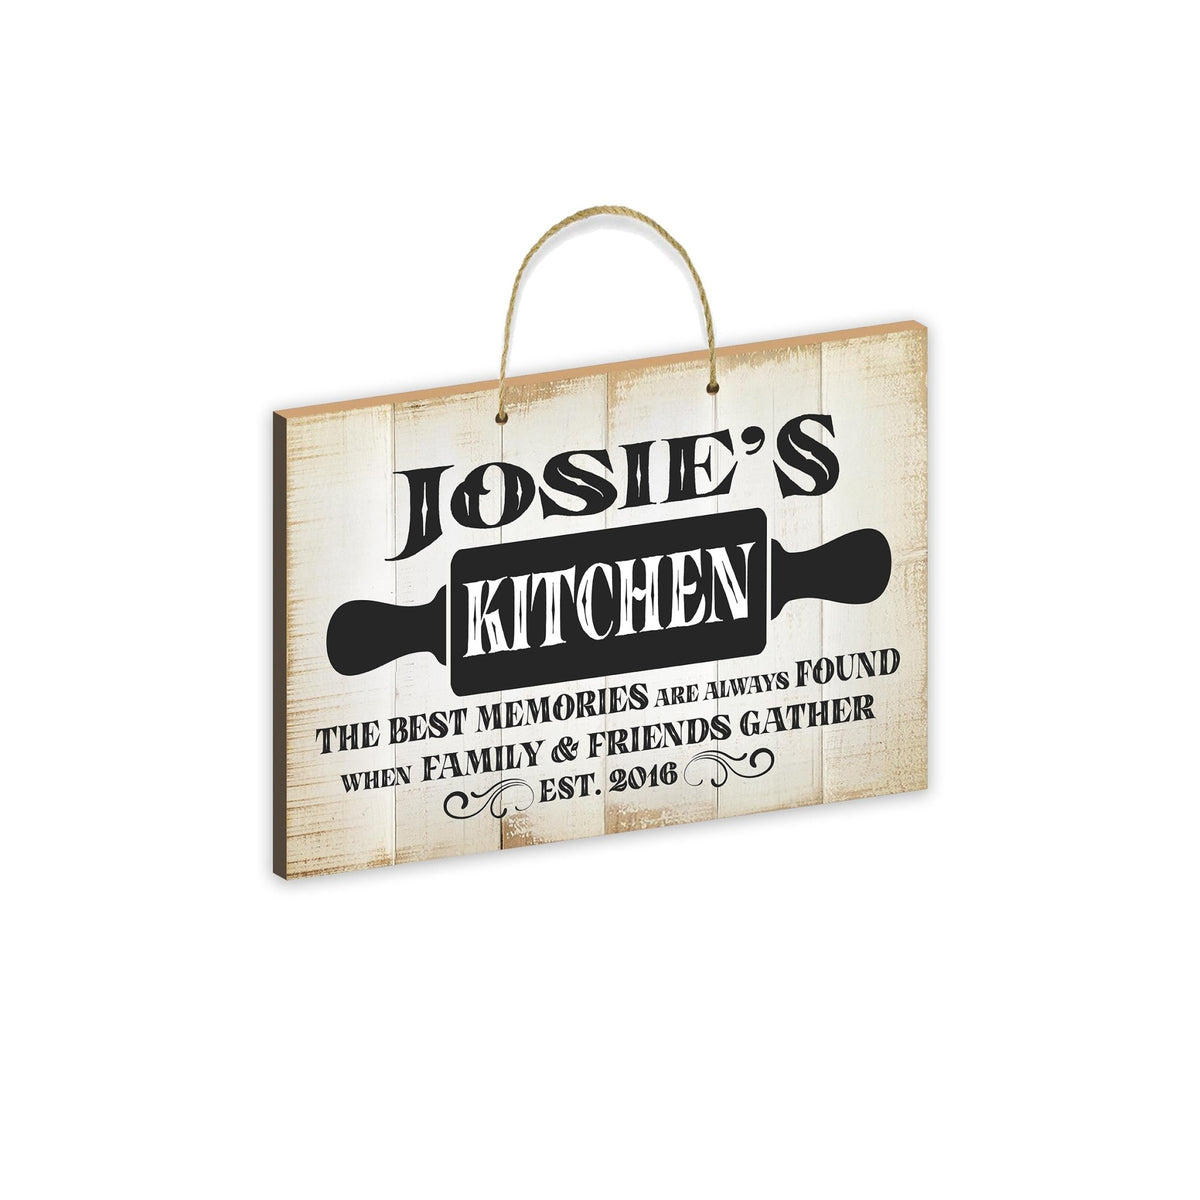 Inspirational Rustic Wooden Wall Hanging Rope Sign Kitchen Décor - The Best Memories [KITCHEN]